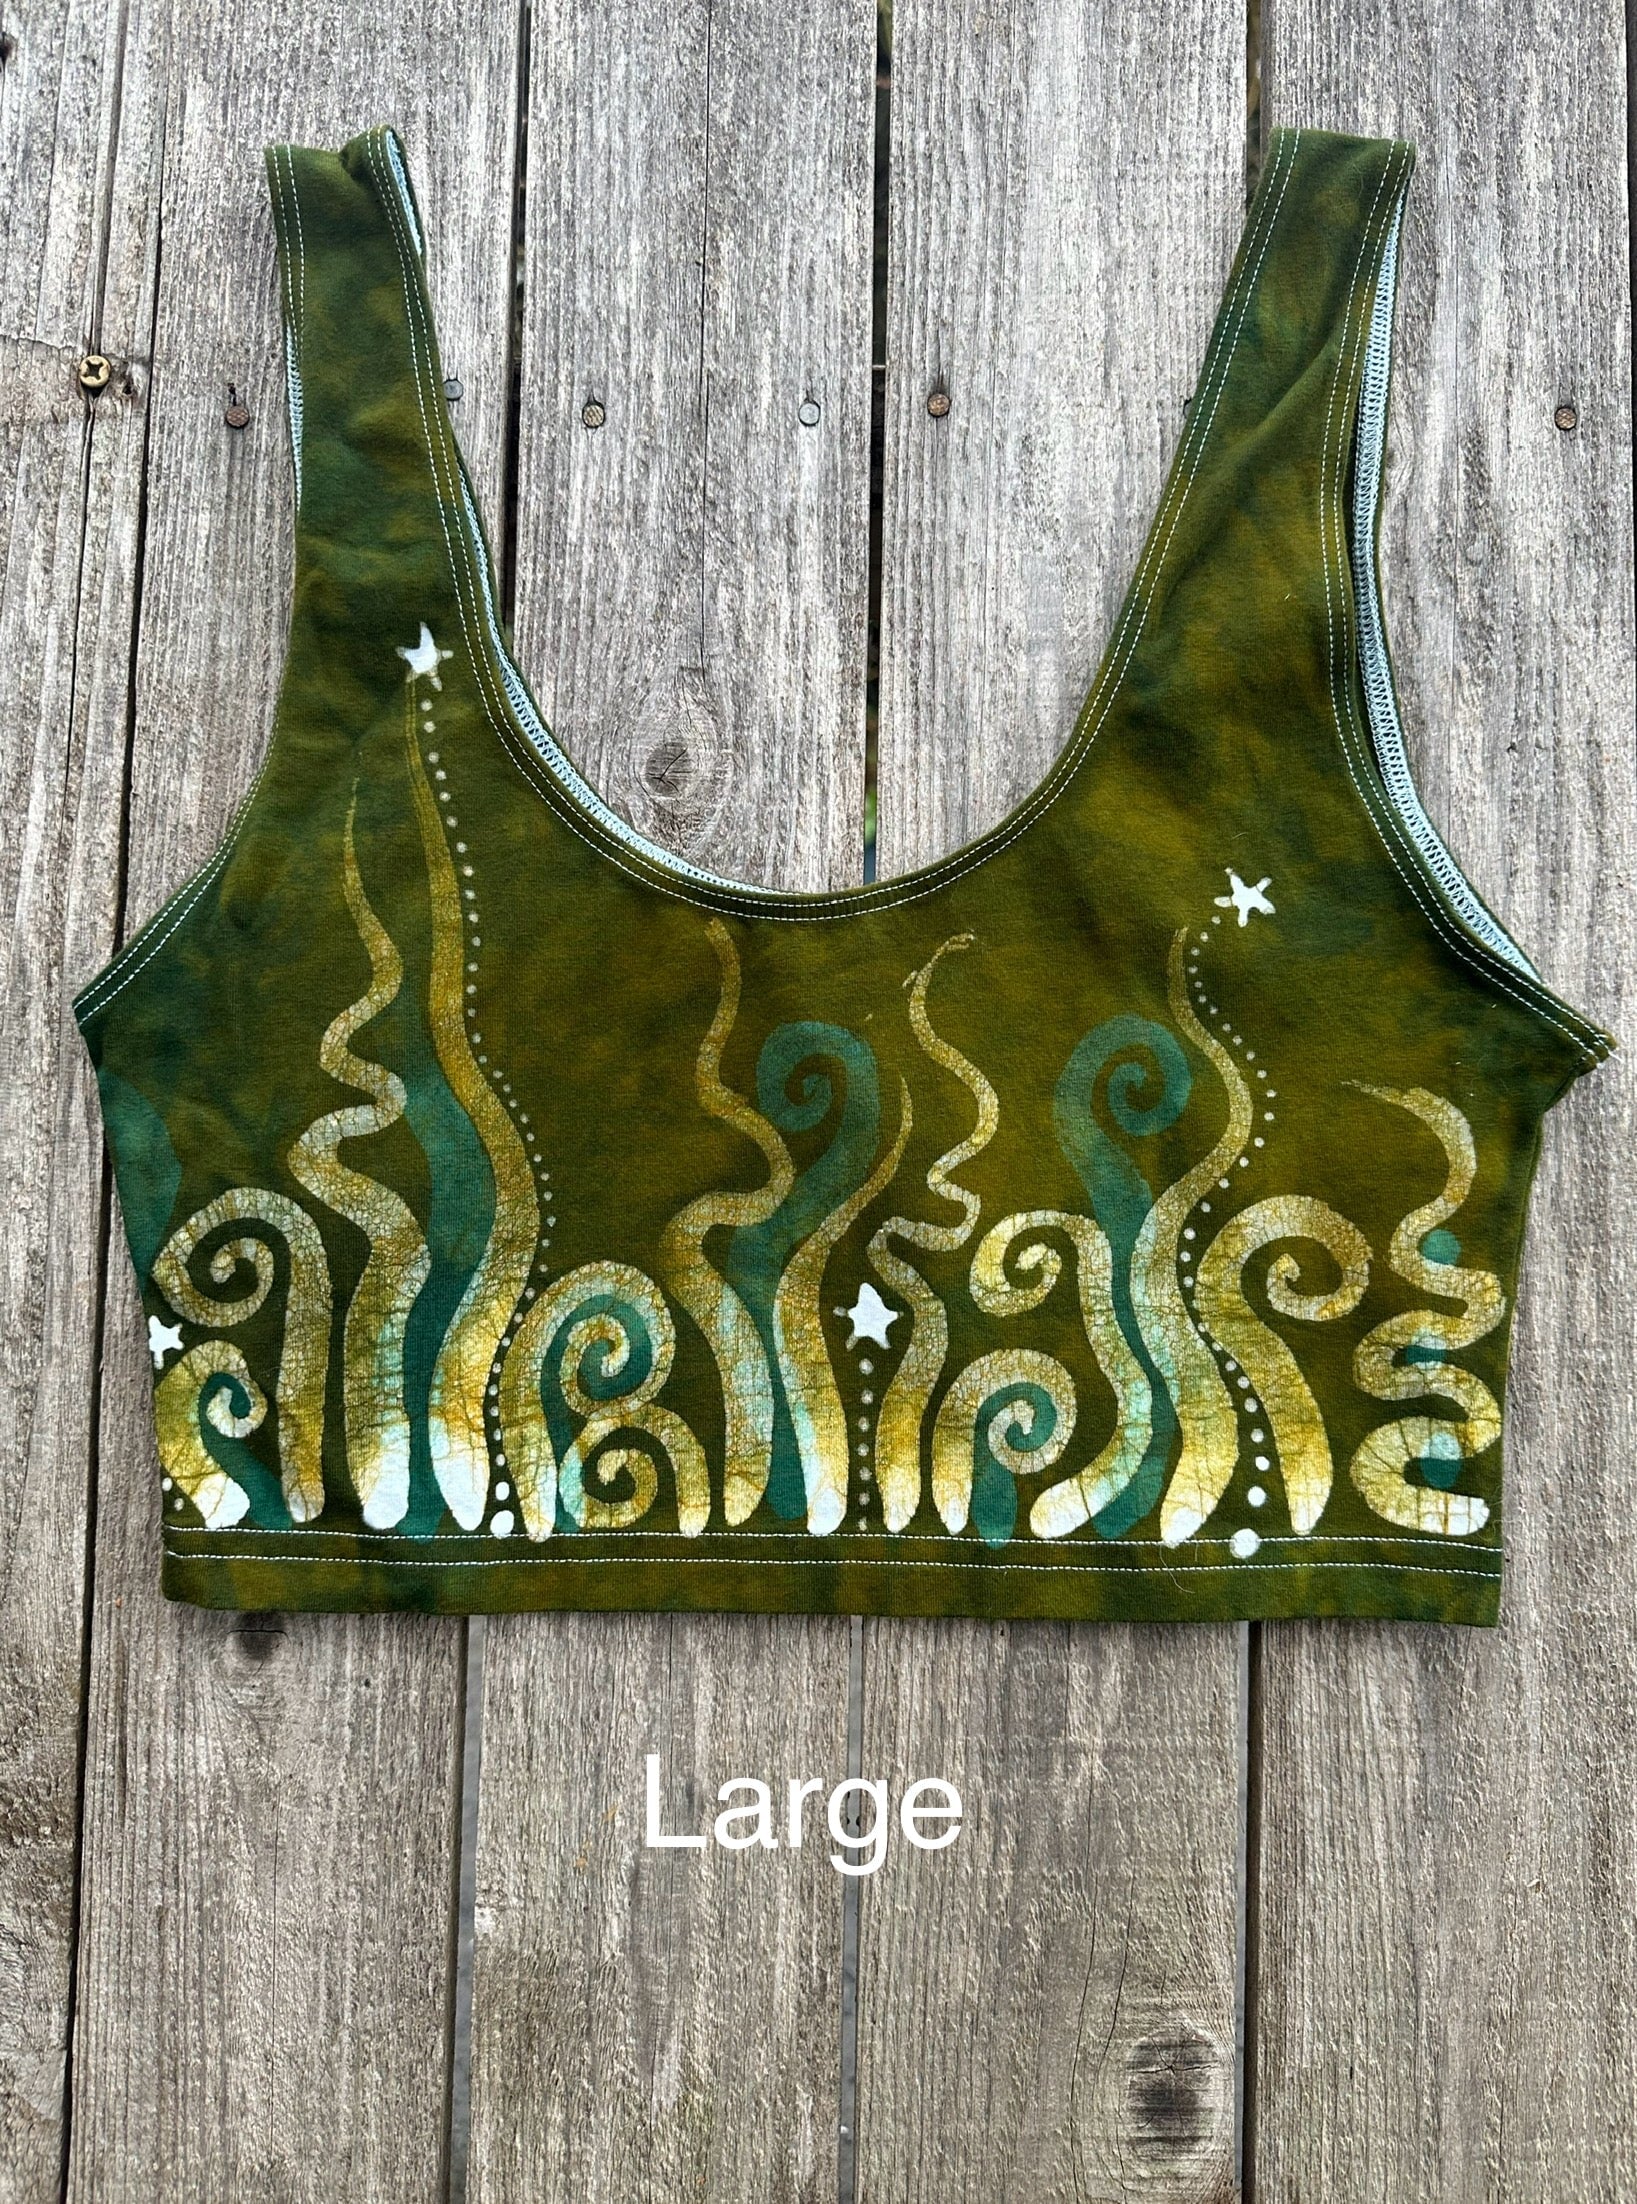 Dancing In The Green Grass With Stars Hand Painted Batik Sports Bra Tops batikwalla Large 